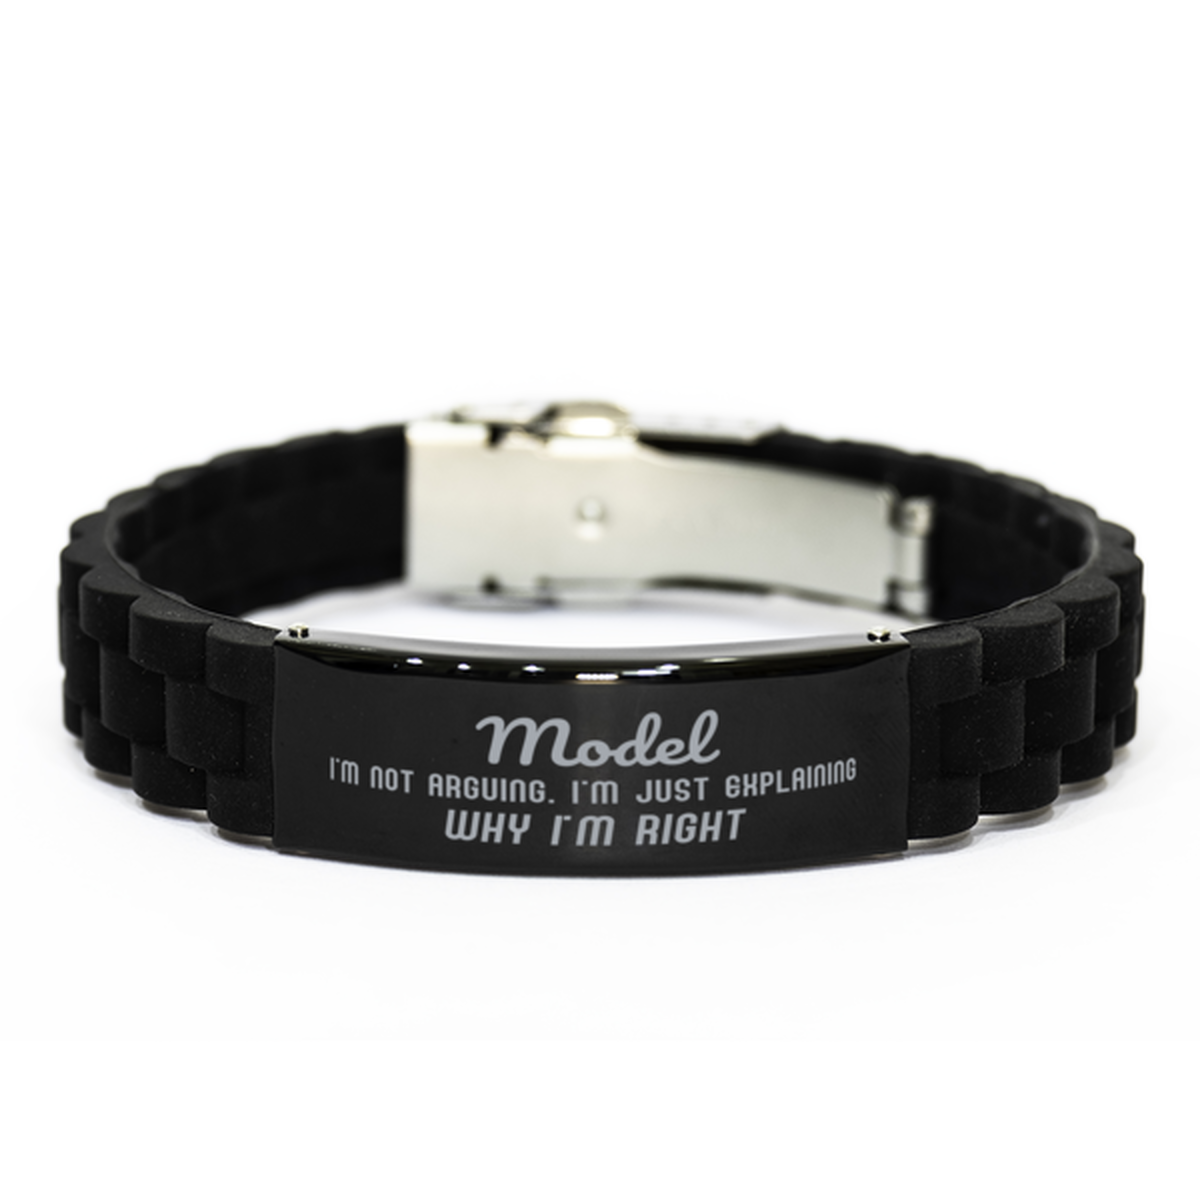 Model I'm not Arguing. I'm Just Explaining Why I'm RIGHT Black Glidelock Clasp Bracelet, Funny Saying Quote Model Gifts For Model Graduation Birthday Christmas Gifts for Men Women Coworker